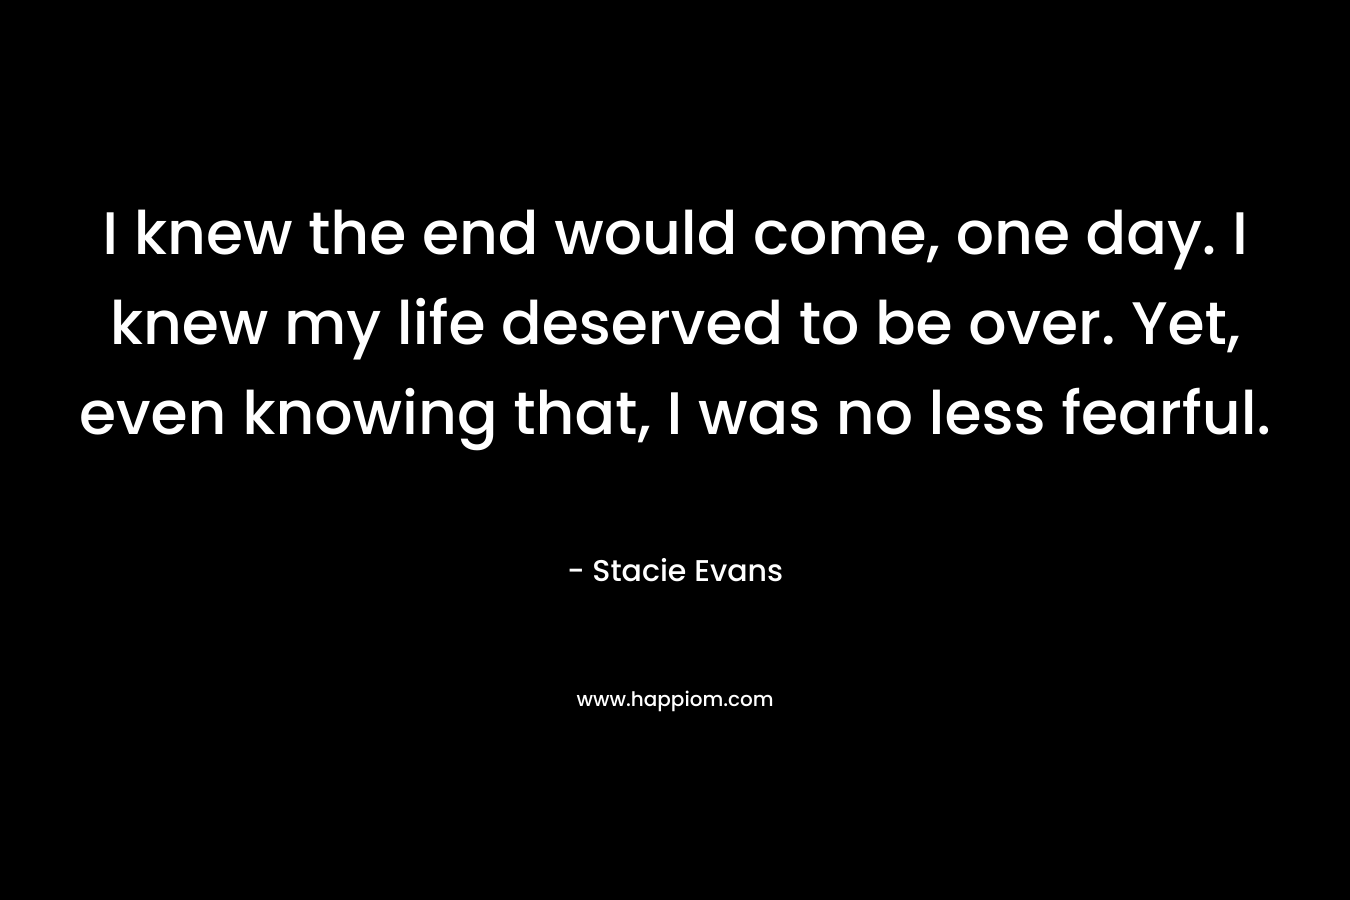 I knew the end would come, one day. I knew my life deserved to be over. Yet, even knowing that, I was no less fearful. – Stacie Evans